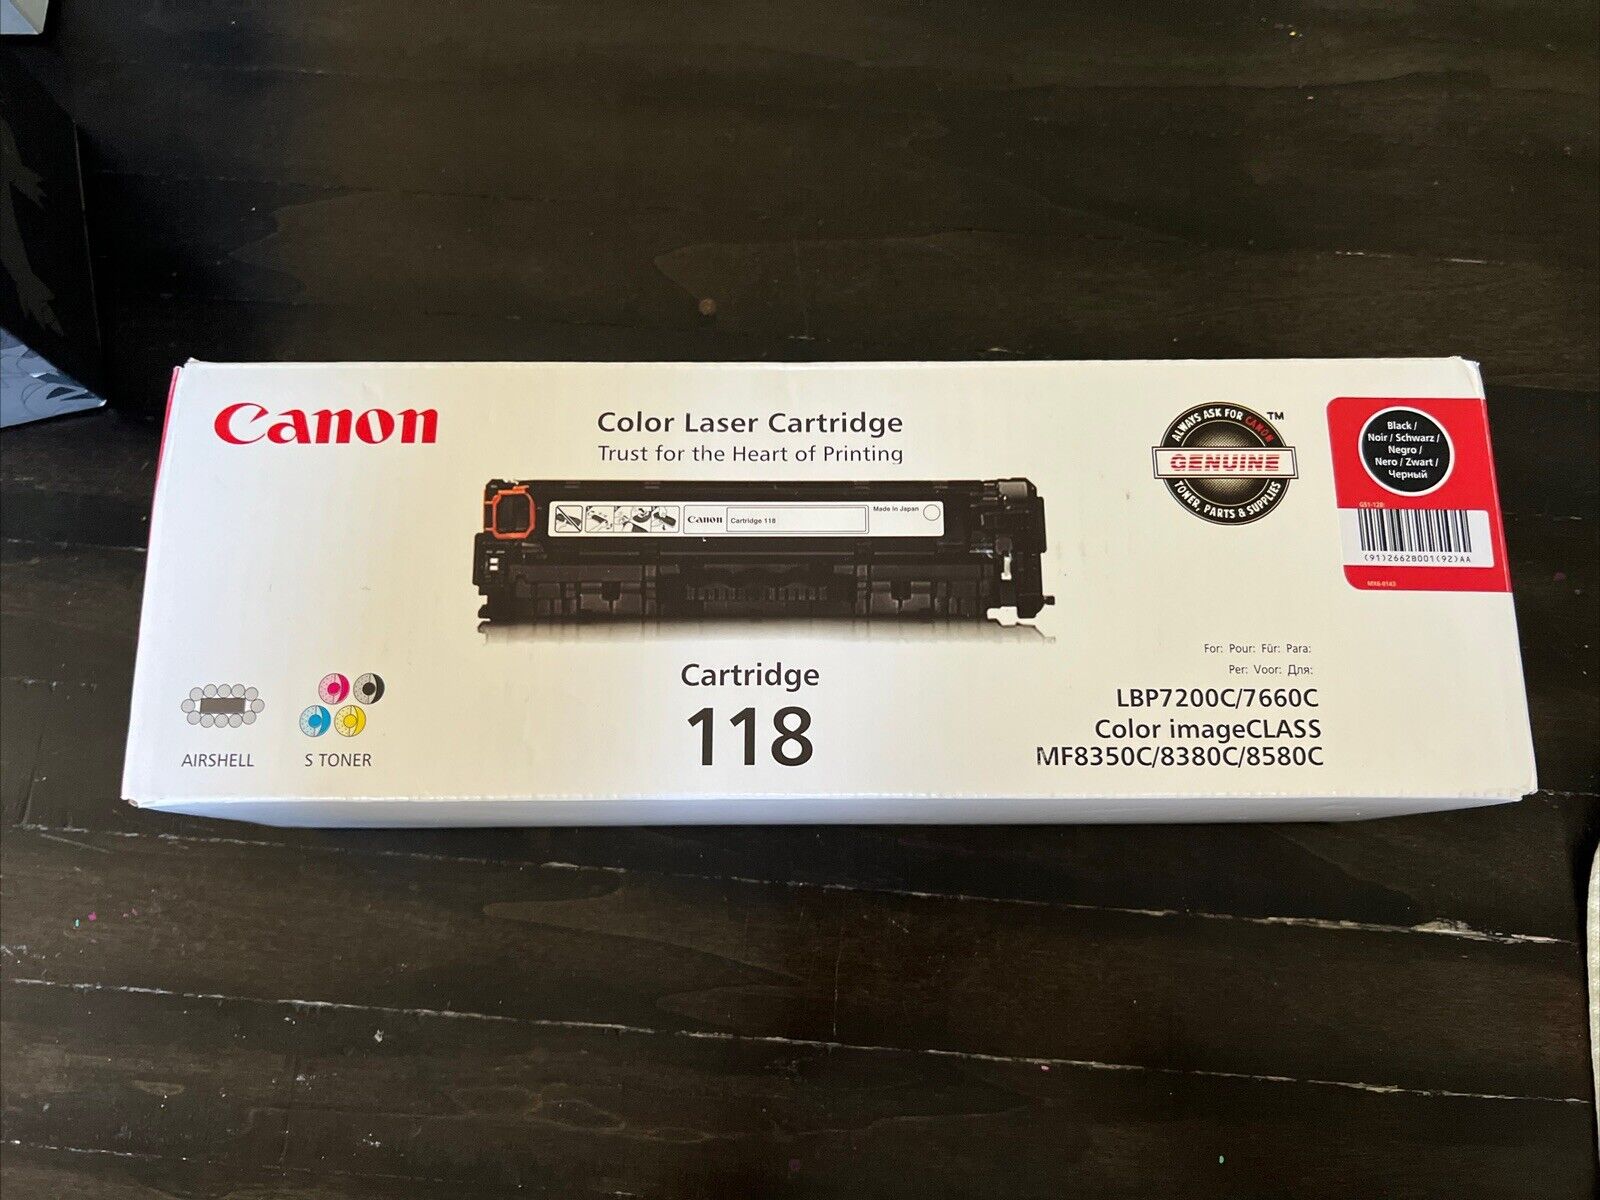 CANON Cartridge 118 Color Laser Cartridge Black New and Sealed in Box